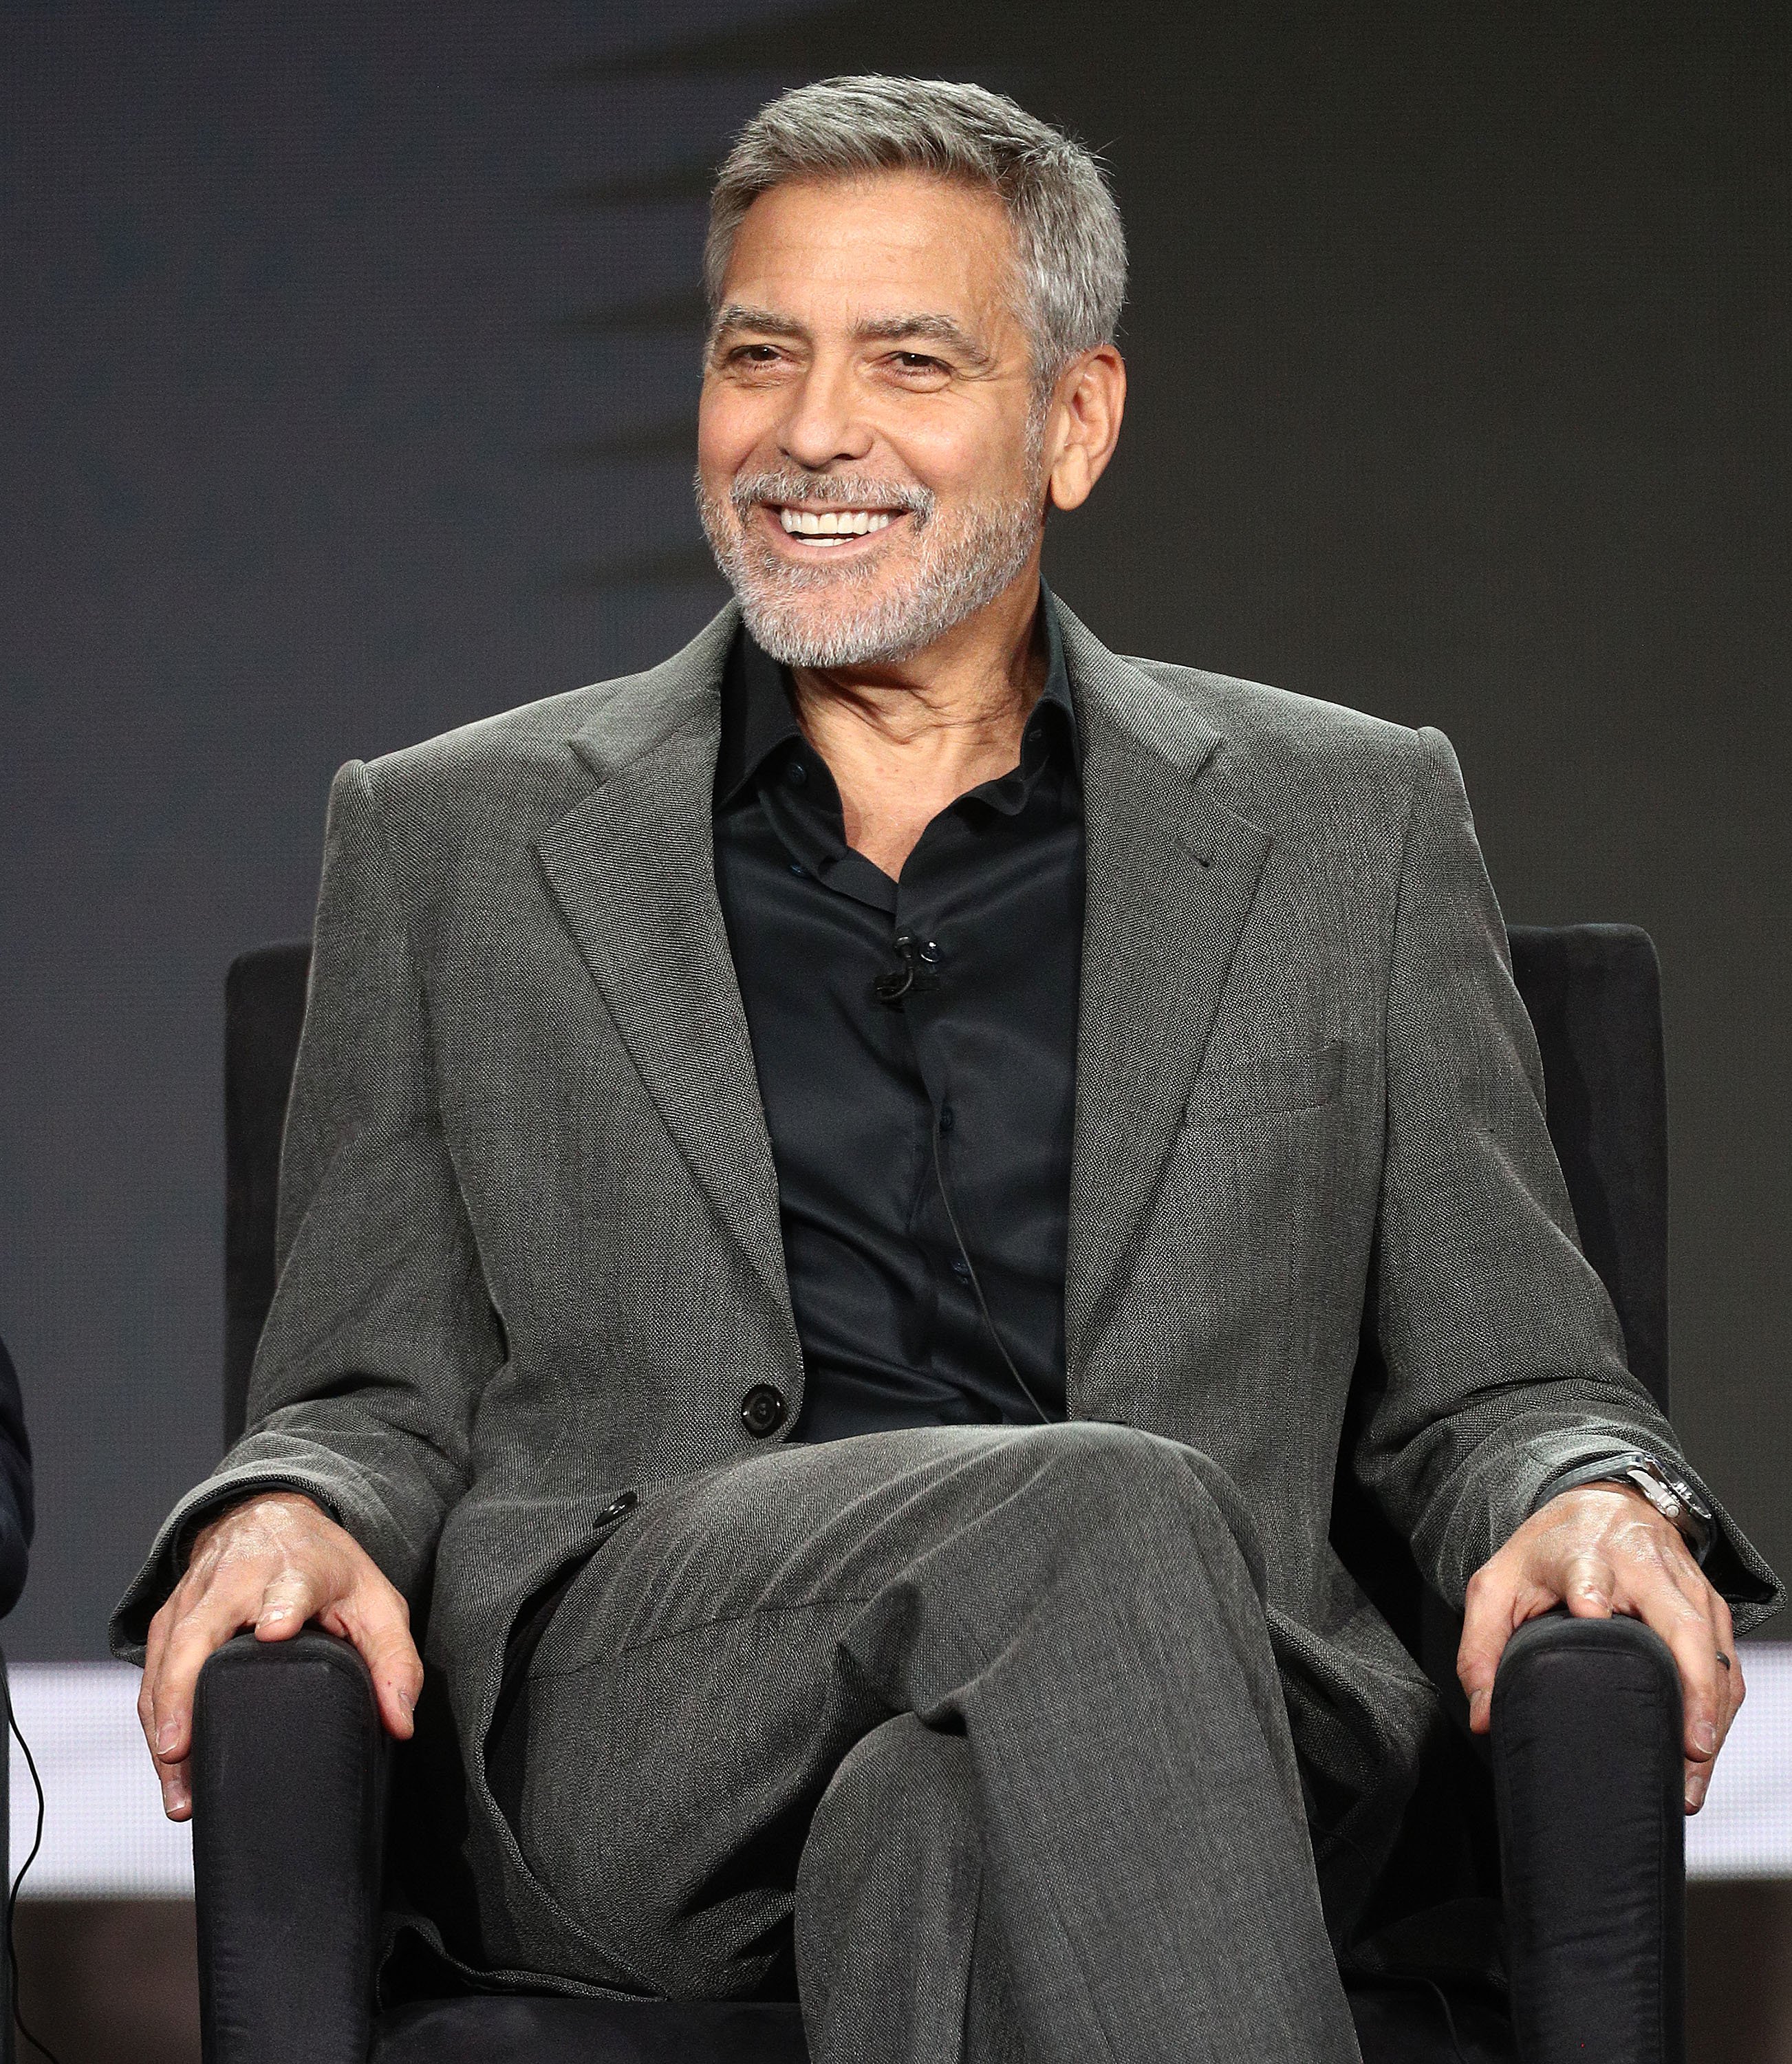 George Clooney attend the Winter Television Critics Association Press Tour on February 11, 2019, in Pasadena, California. | Source: Getty Images.